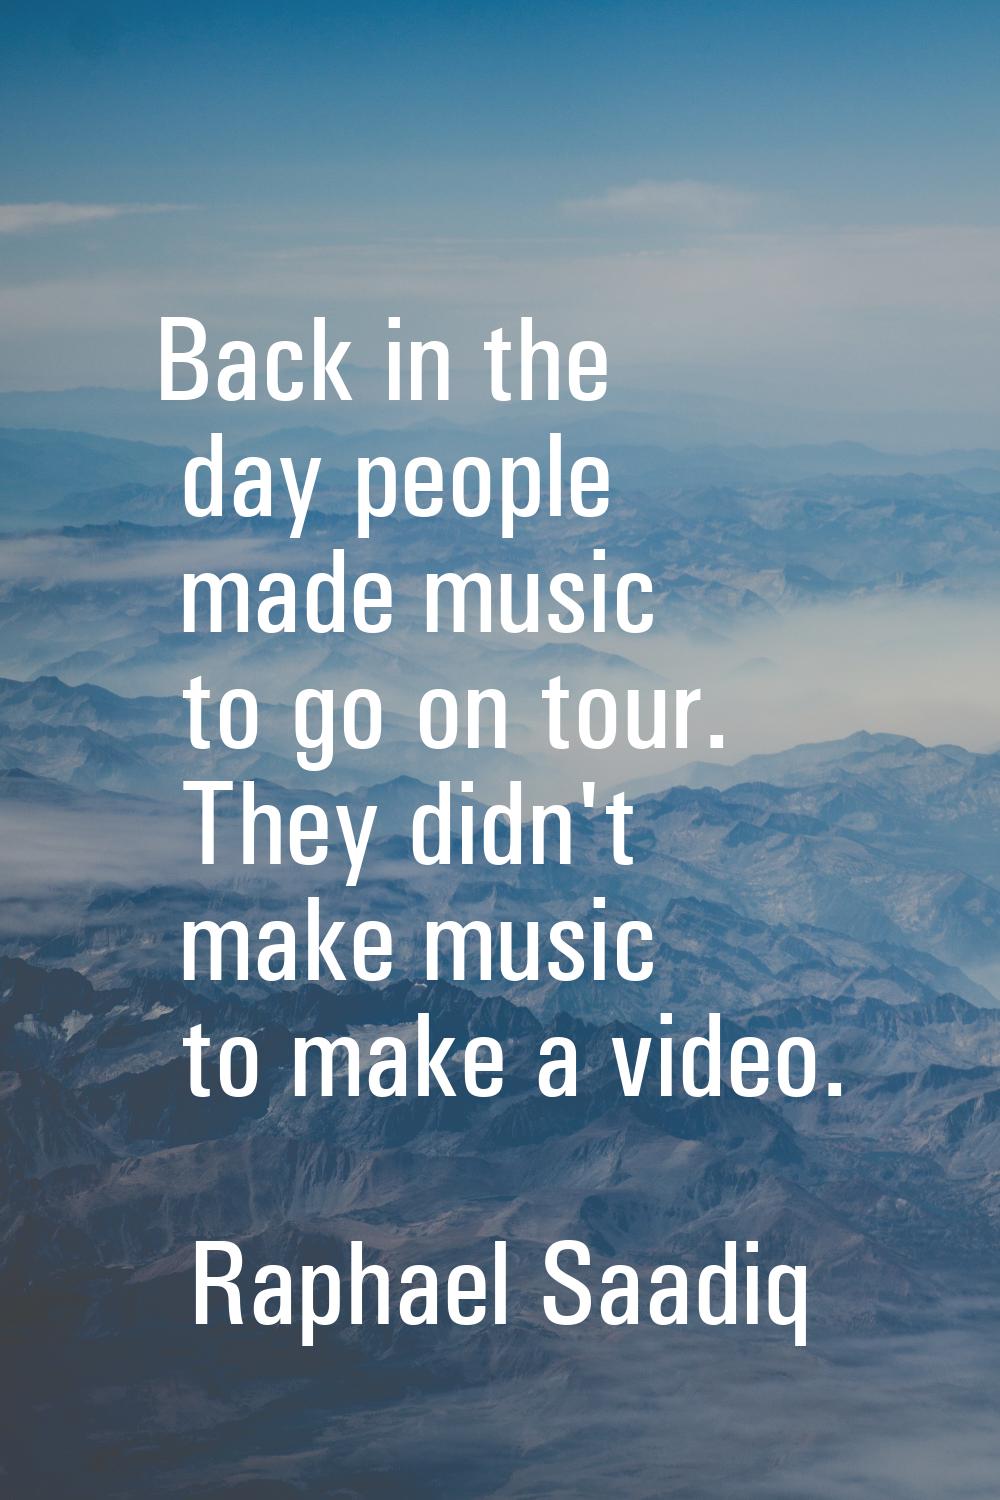 Back in the day people made music to go on tour. They didn't make music to make a video.